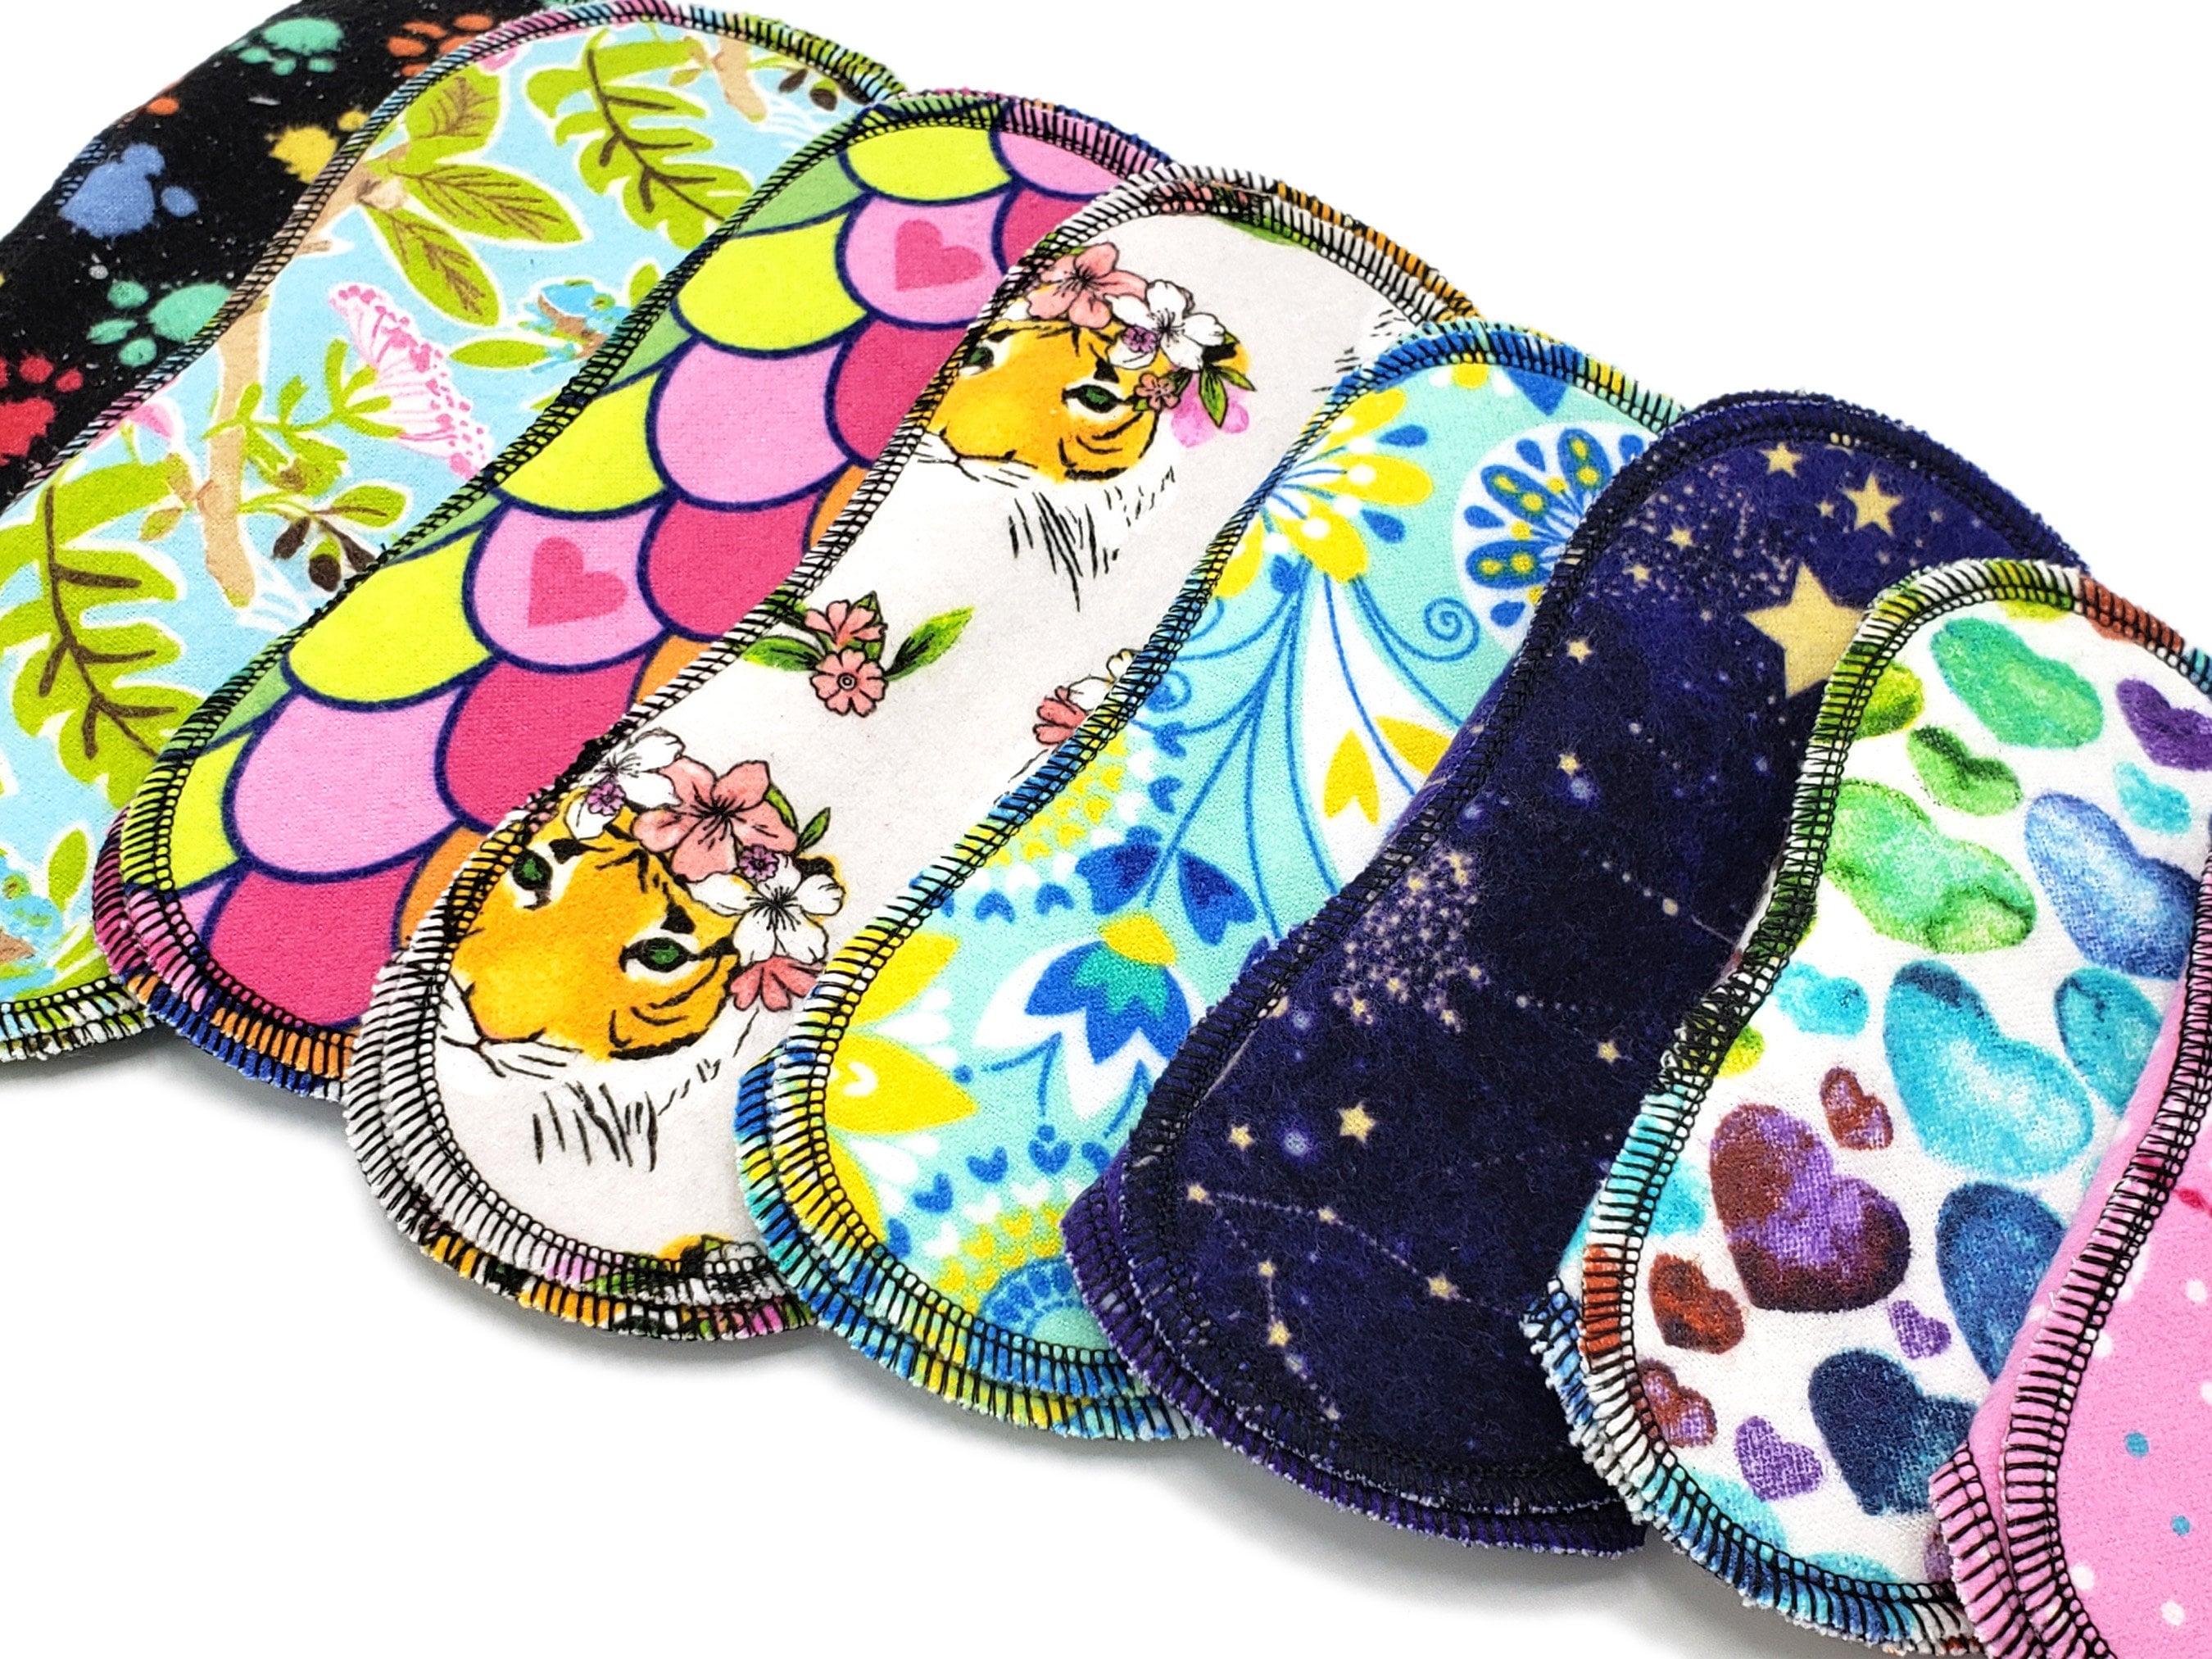 Reusable Panty Liners - Super Soft and Leakproof Cotton Flannel Panty Liners  for Light Flow in Cute Prints in 6, 7, 8, 9